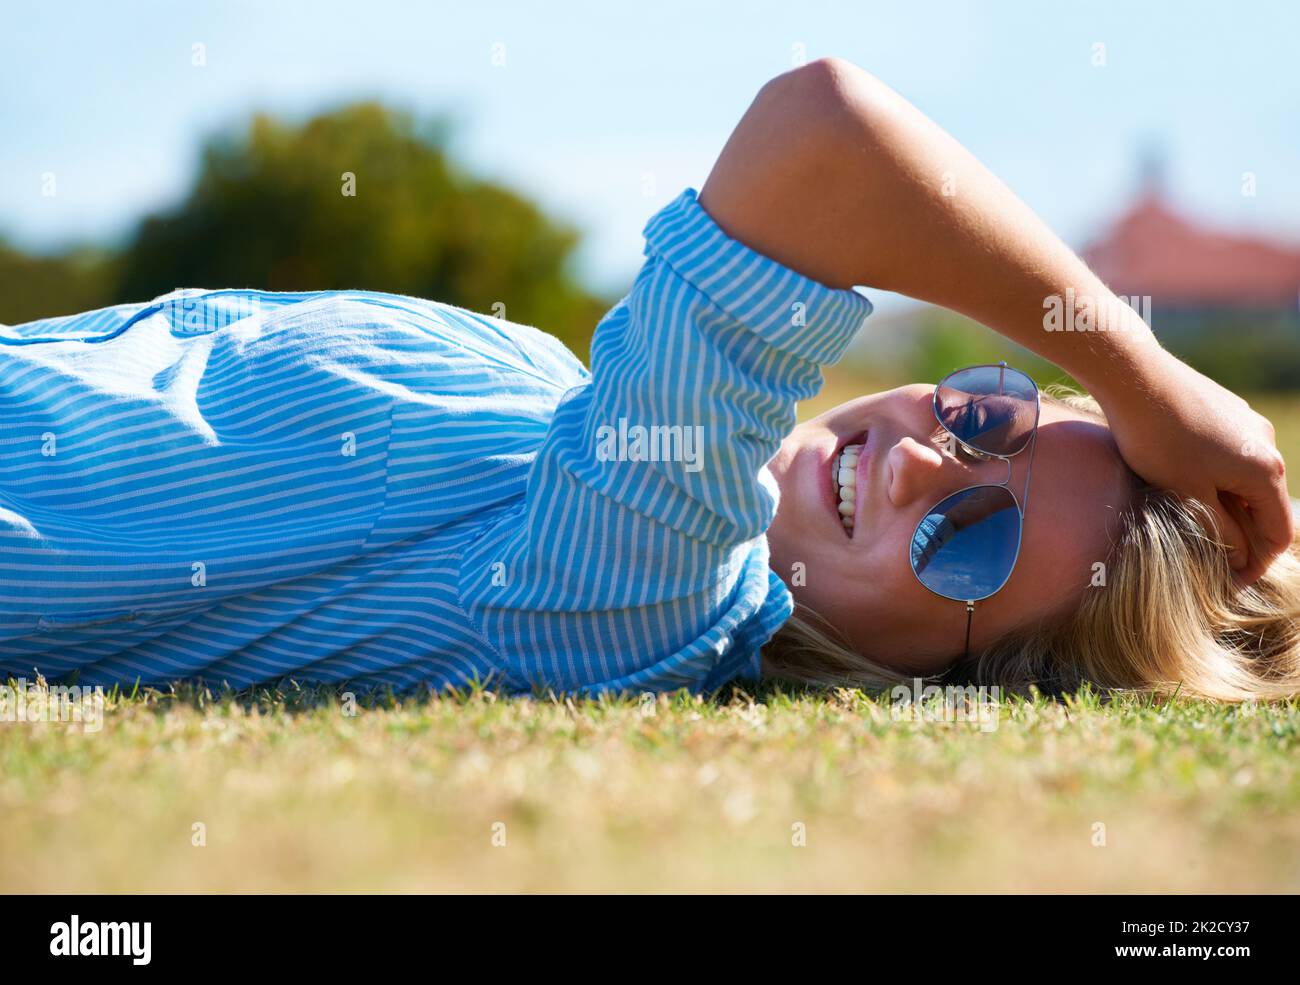 Summers finally here. A happy woman lying on a patch of grass in the sunshine. Stock Photo